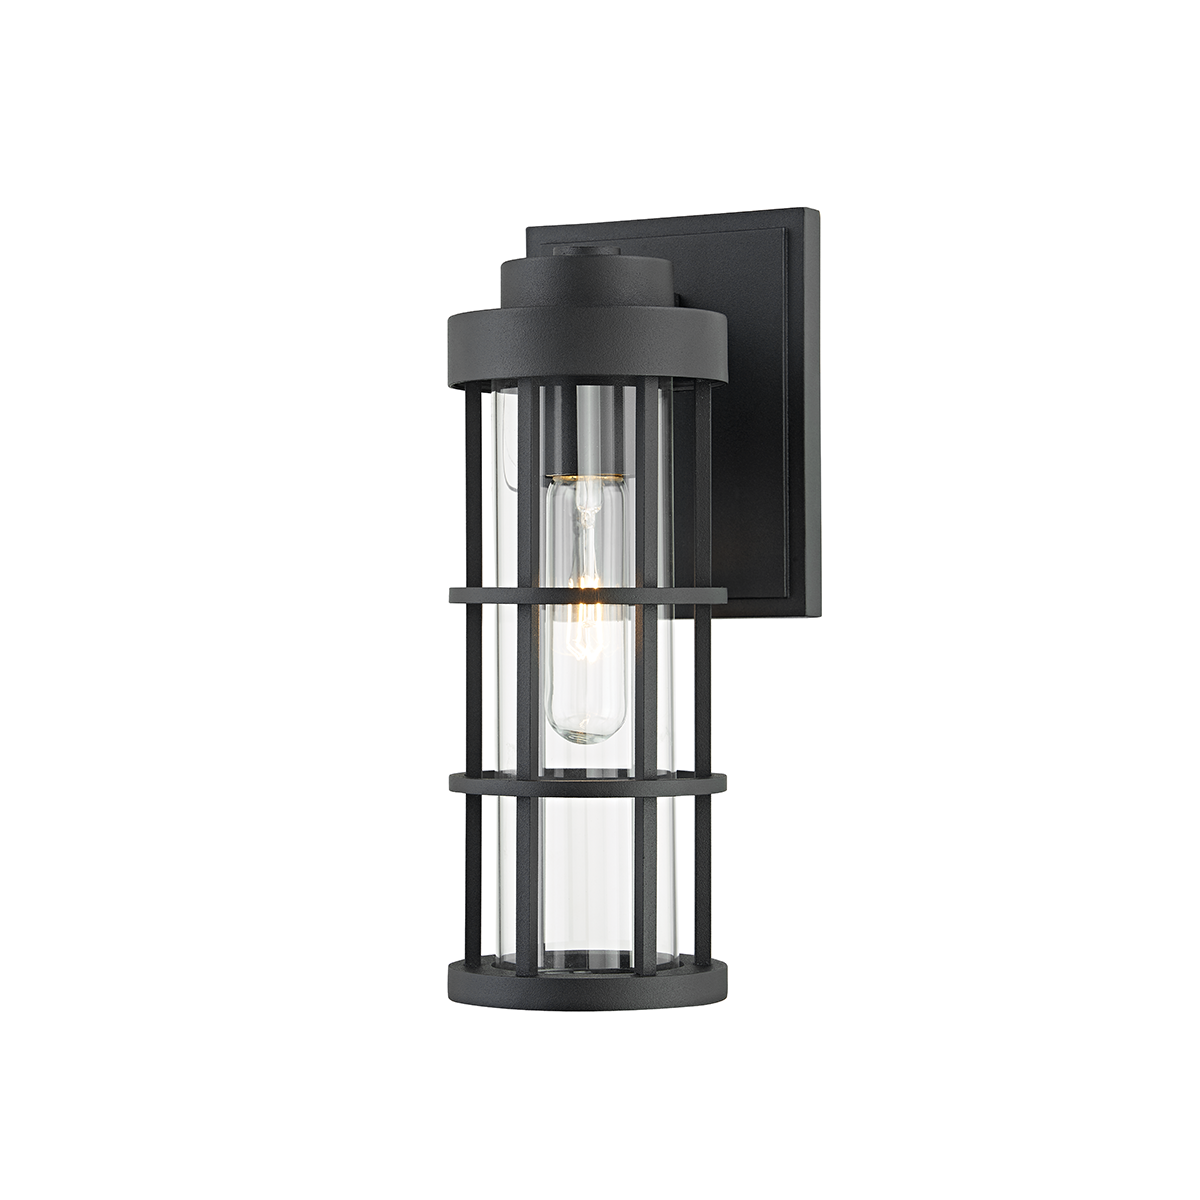 Troy Lighting 1 LIGHT SMALL EXTERIOR WALL SCONCE B2041 Outdoor l Wall Troy Lighting TEXTURE BLACK  